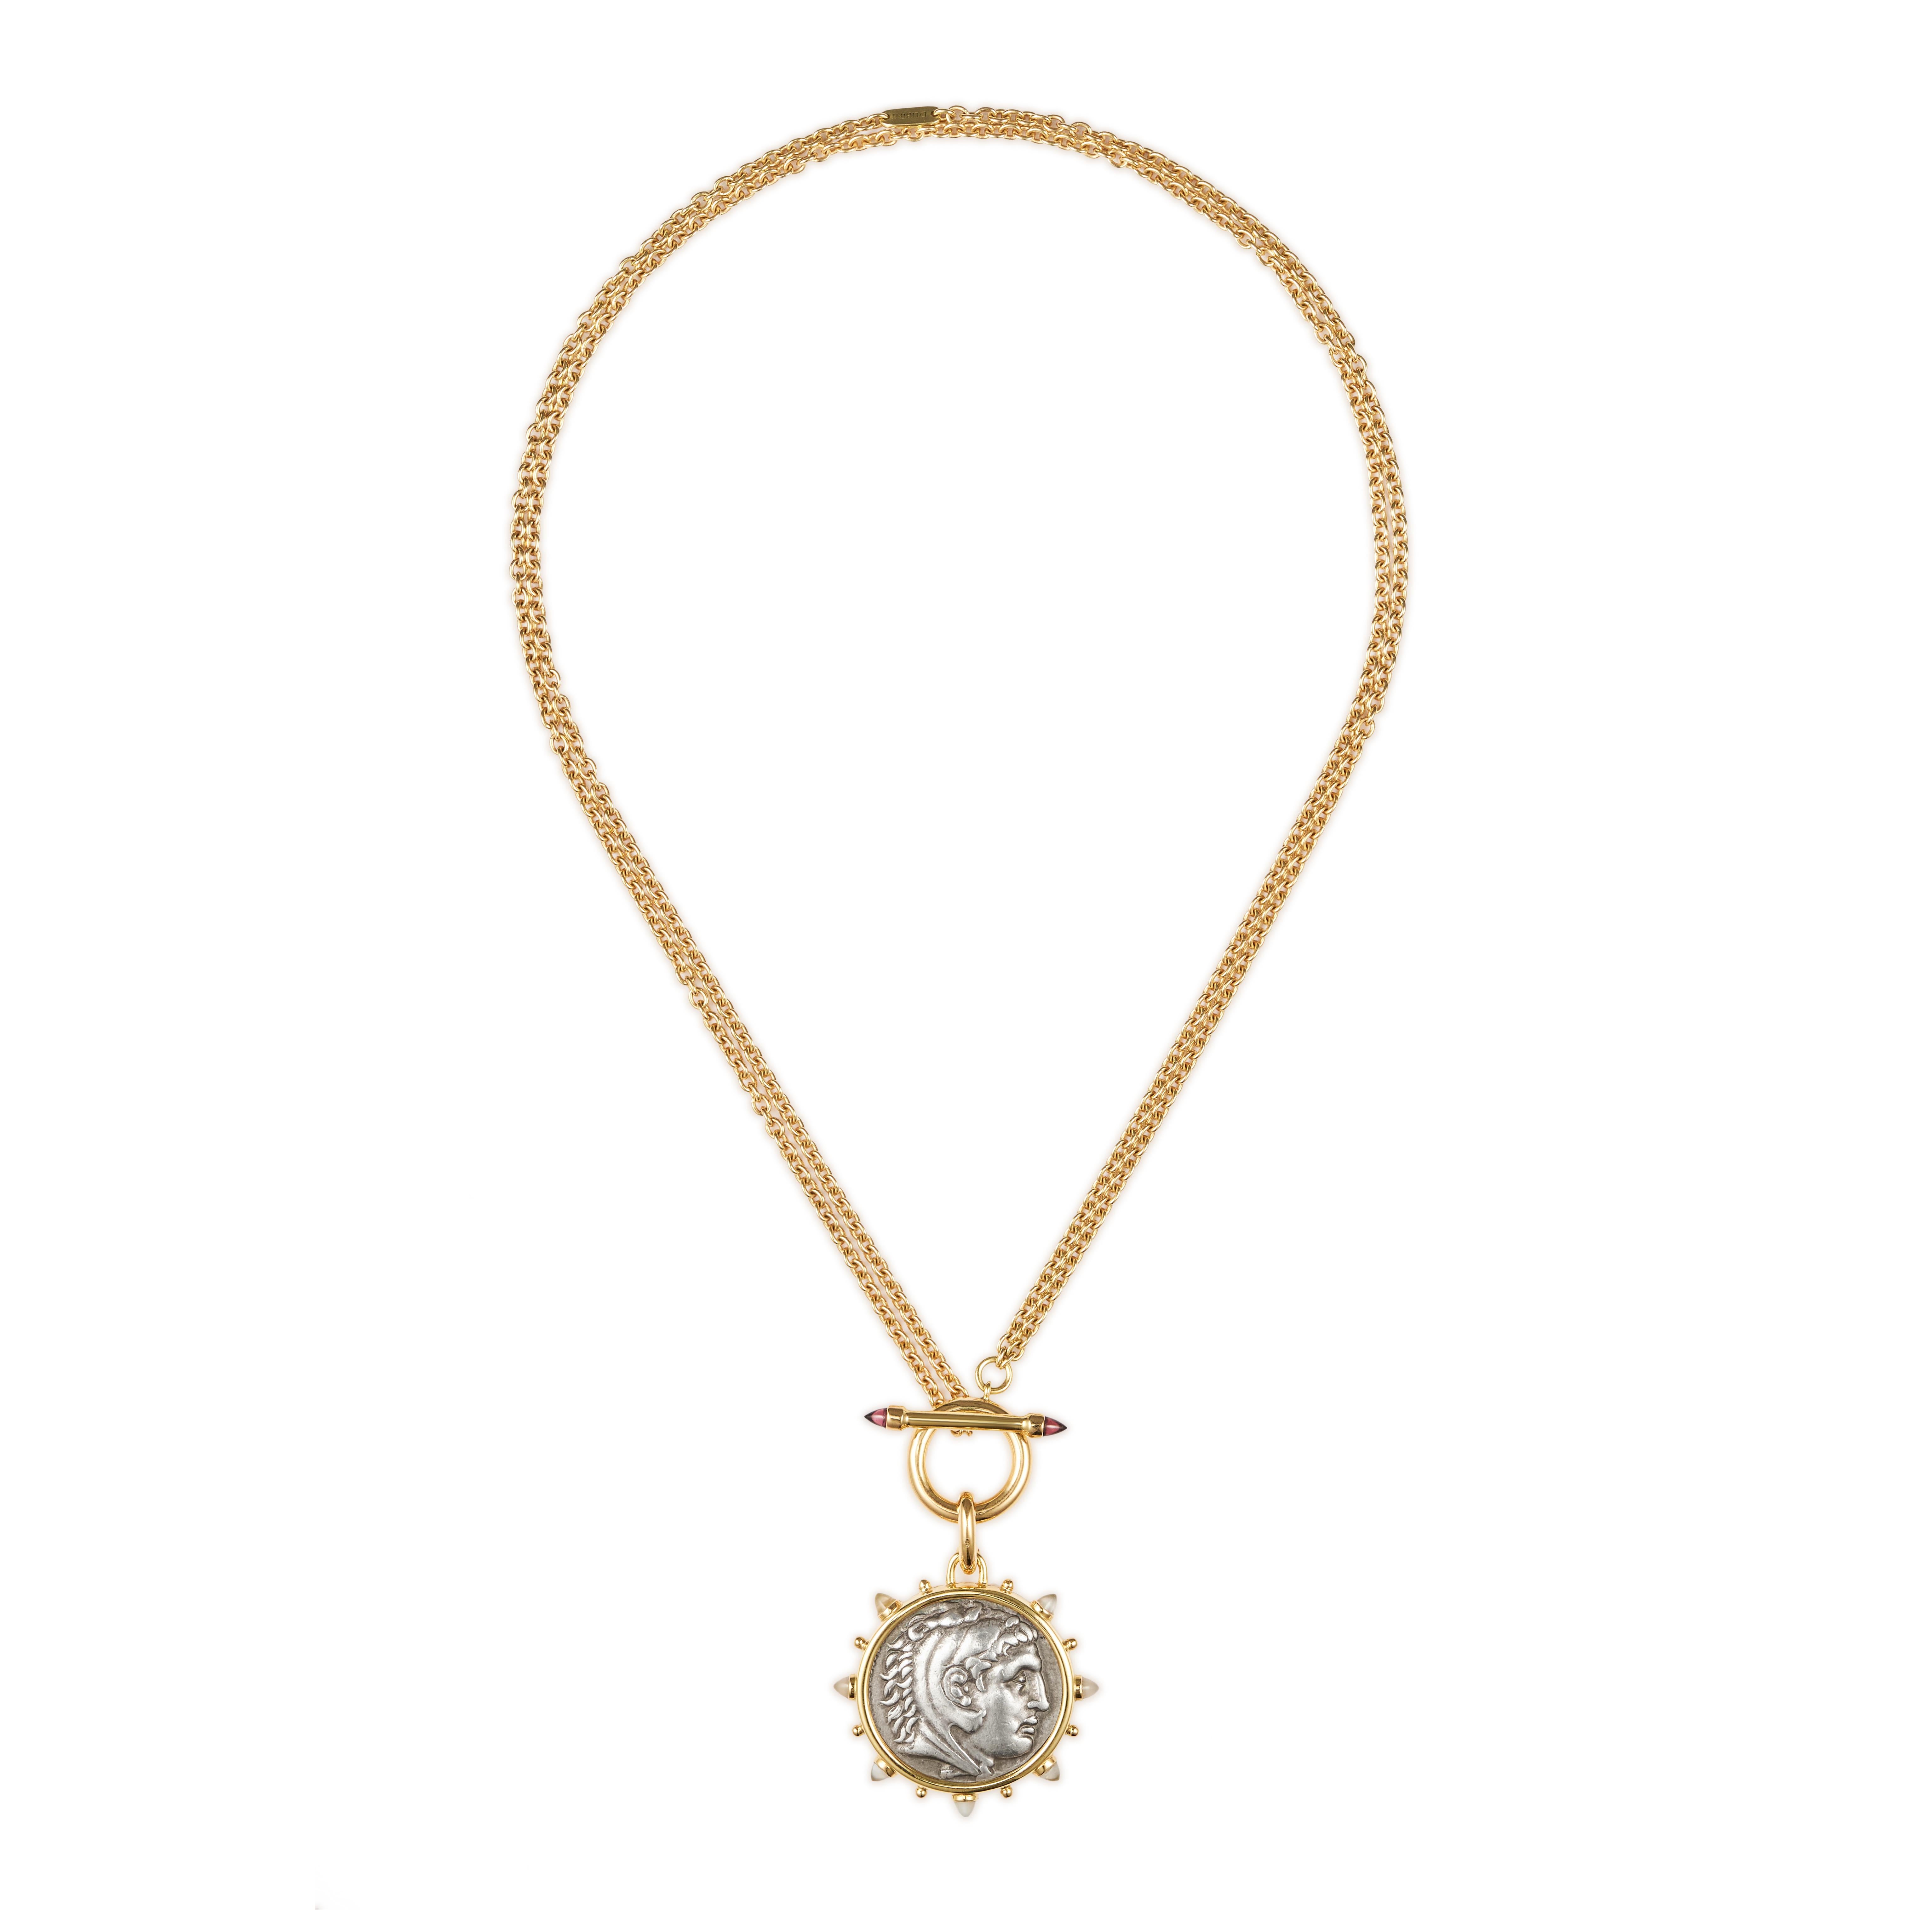 This DUBINI coin necklace from the 'Empires' collection features an authentic Macedon coin set in 18K yellow gold embellished with bullet moonstone cabochons, paired with a unique rollo chain front closing toggle featuring rhodolite garnet